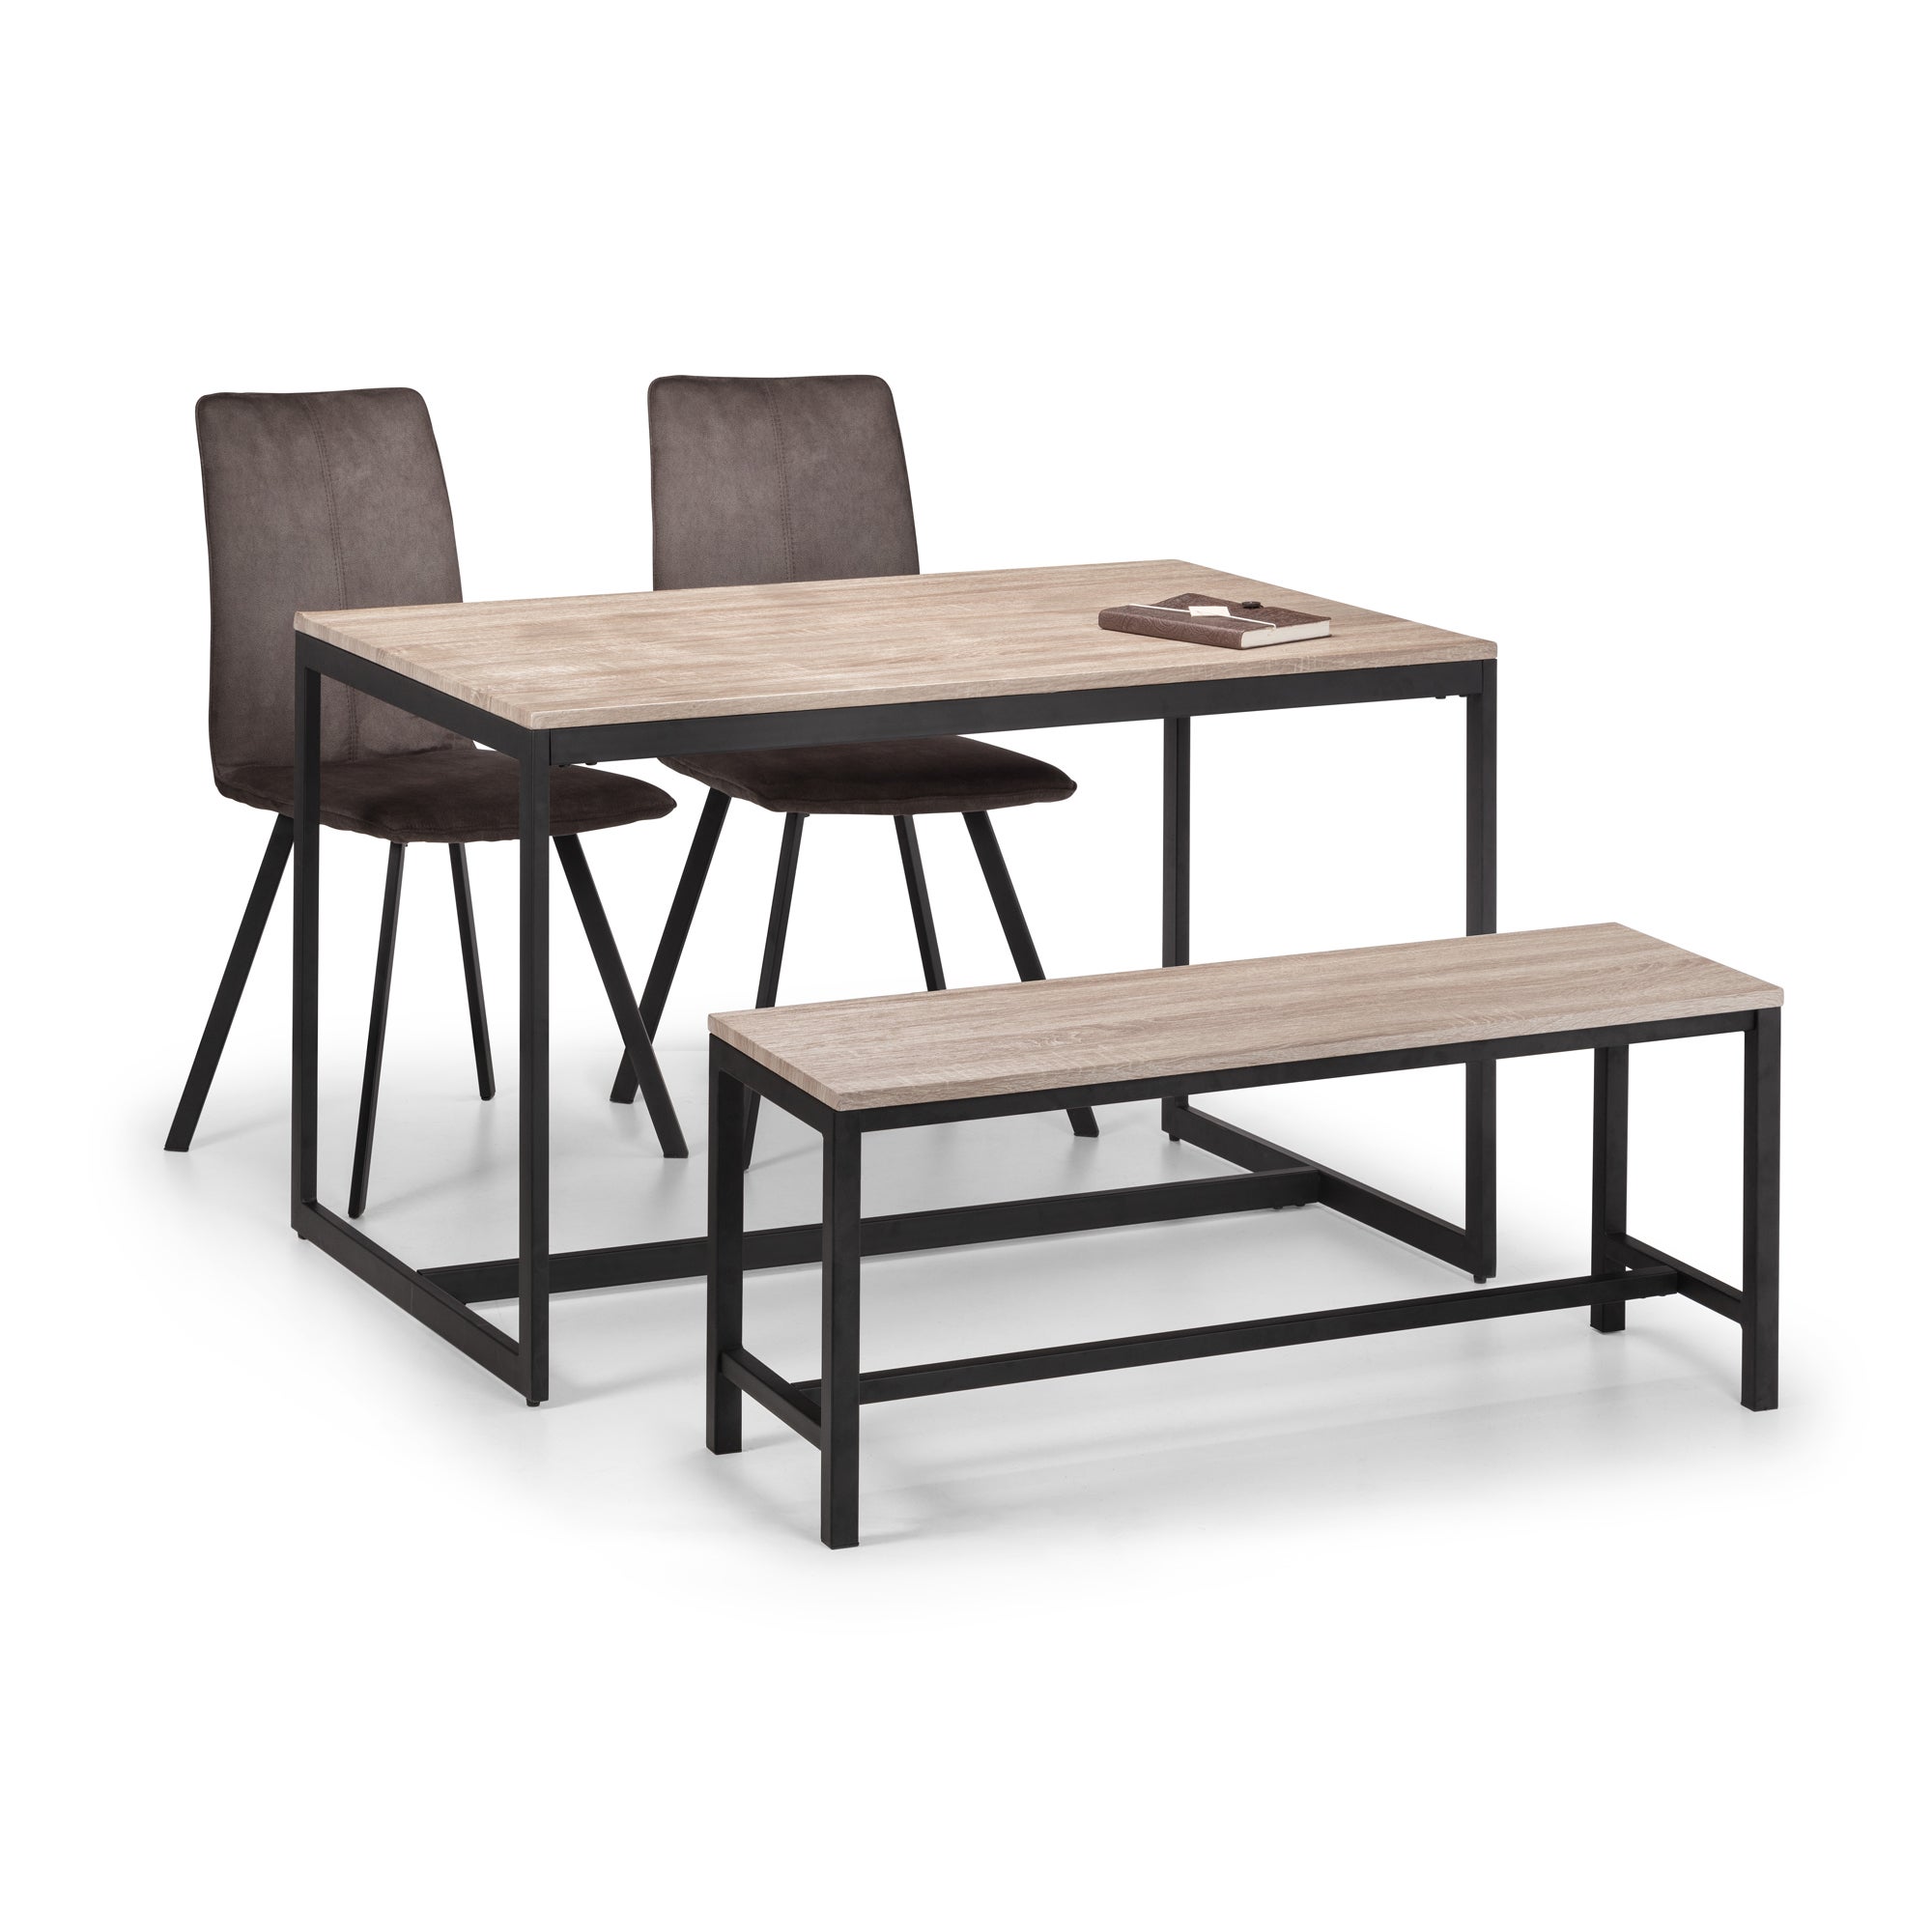 Tribeca Rectangular Dining Table With 2 Chairs And Bench Black Black